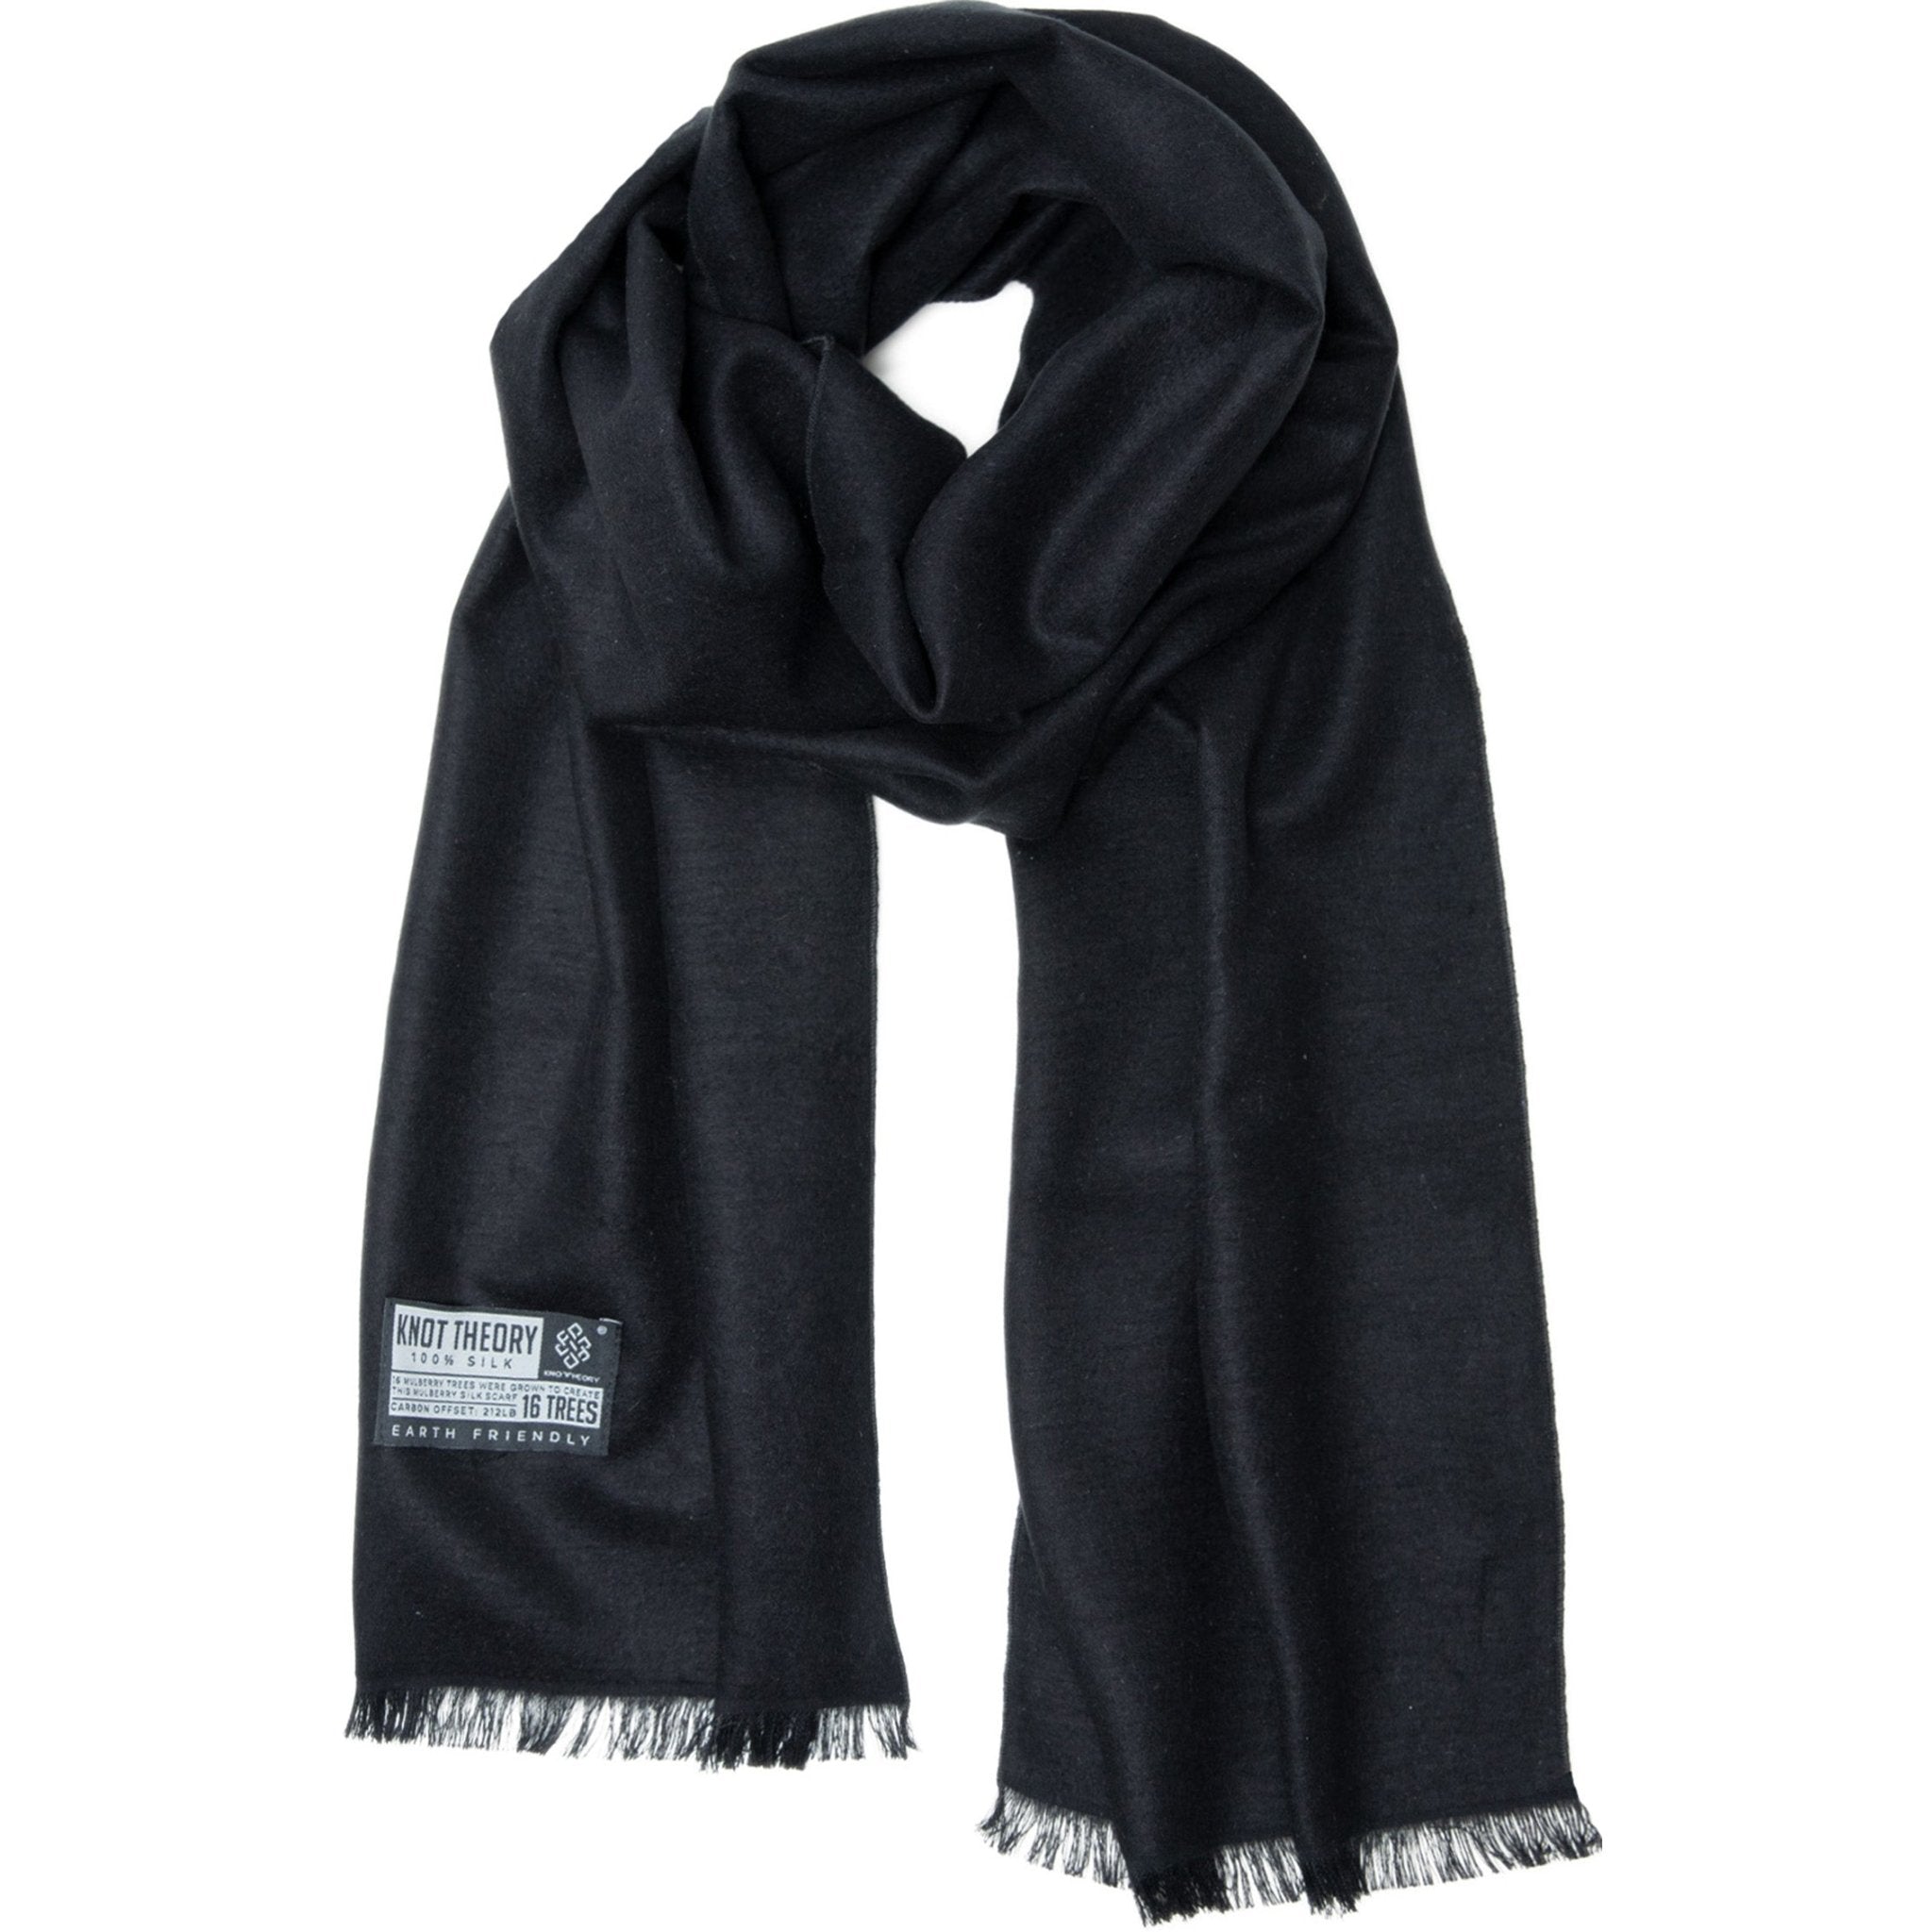 Black Silk Eco Scarf - Softer than Cashmere 100% Silk - Knot Theory